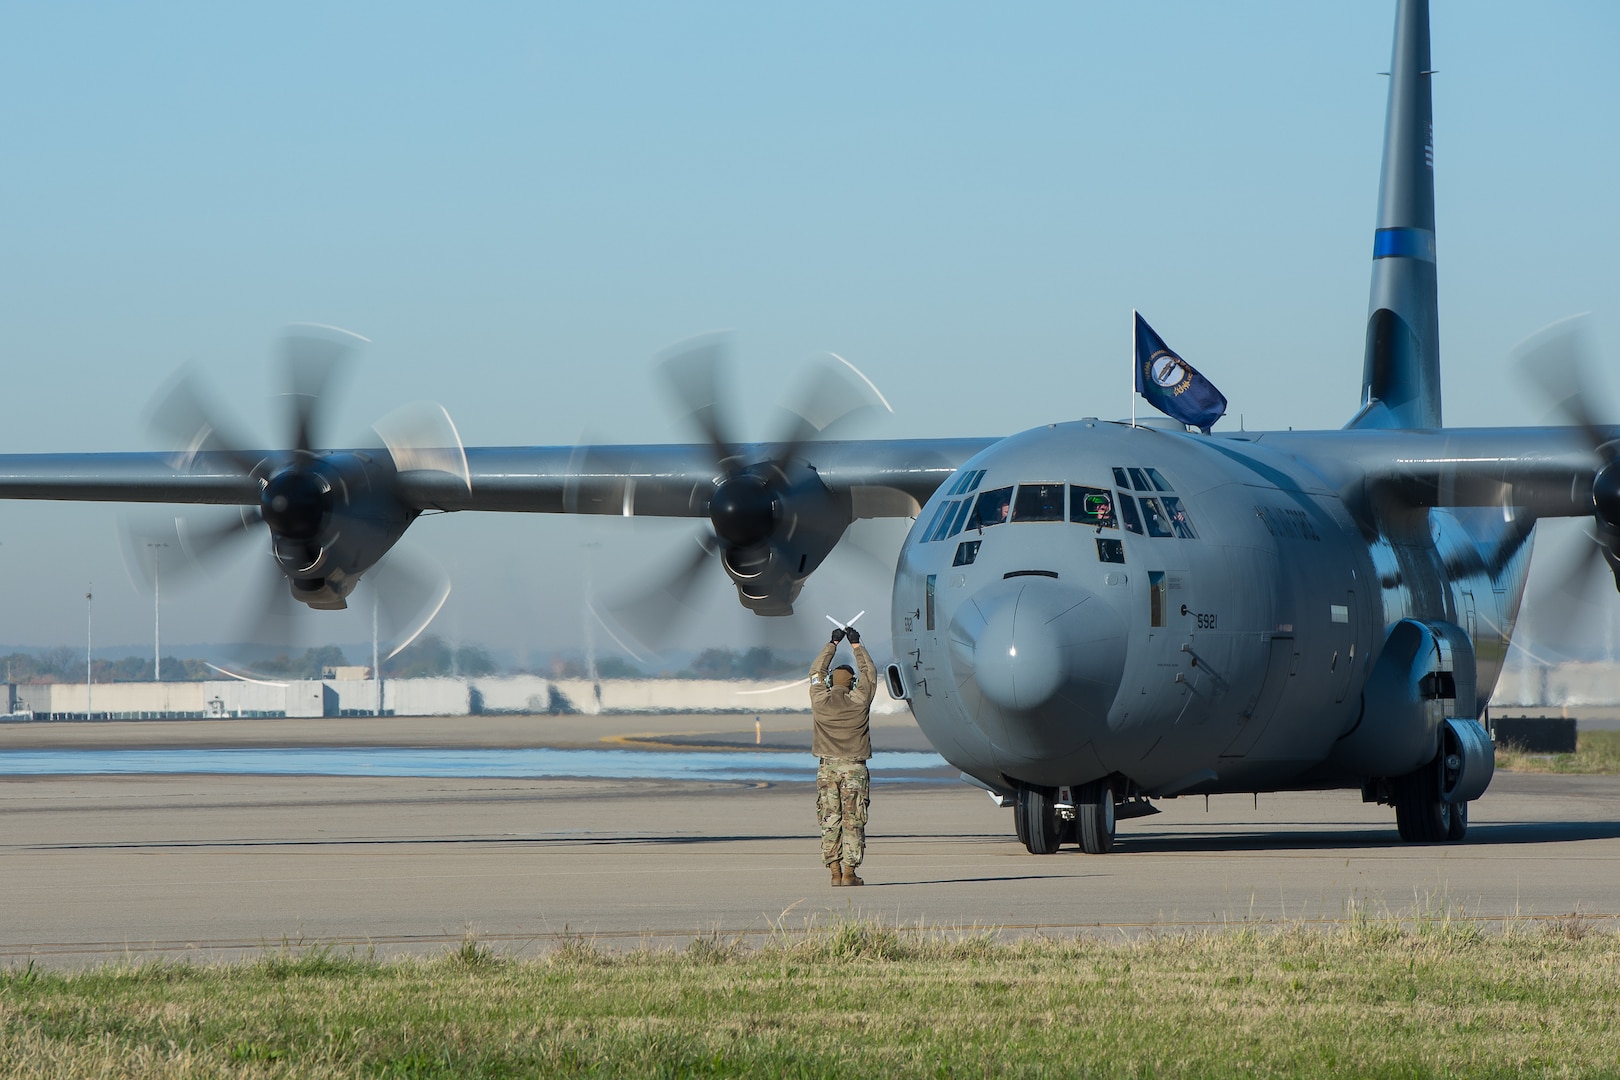 One of two new C-130J Super Hercules aircraft arrives at the Kentucky Air National Guard Base in Louisville, Ky., Nov. 6, 2021, ushering in a new era of aviation for the 123rd Airlift Wing. The state-of-the-art transports are among eight the wing will receive over the next 11 months to replace eight aging C-130 H-model aircraft.